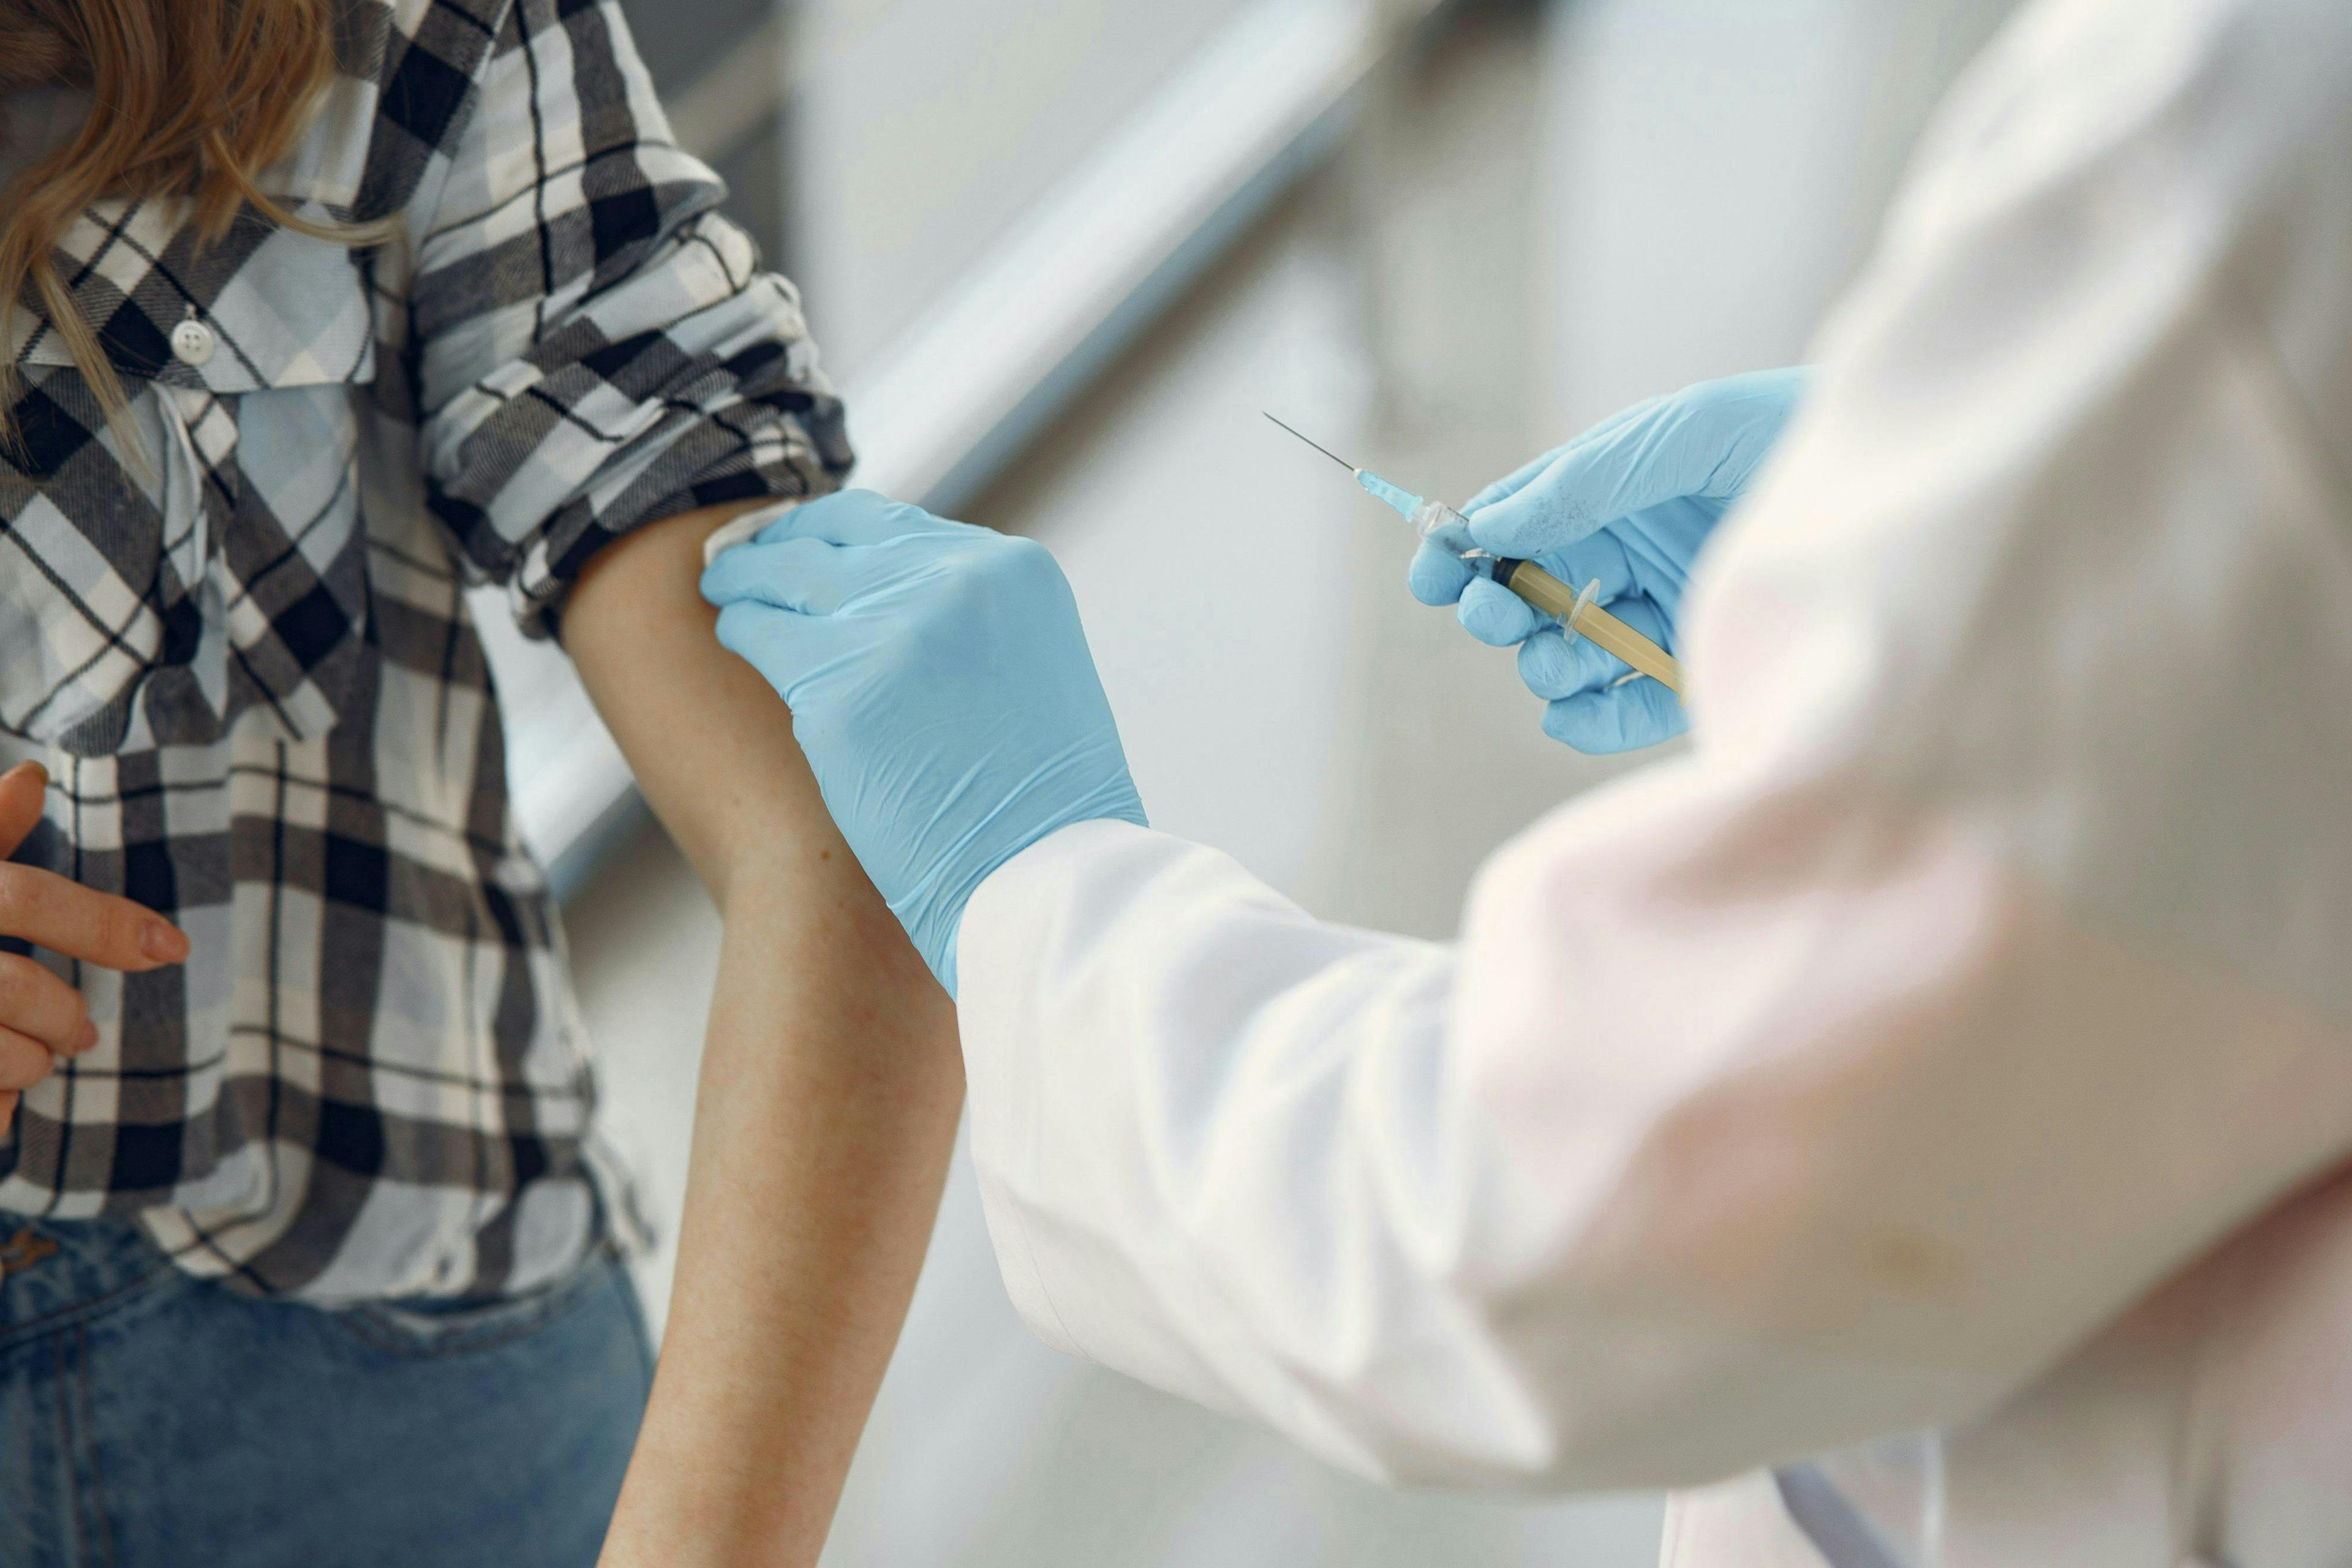 A person in a plaid shirt receives an injection from a healthcare professional wearing blue gloves in a clinical setting.